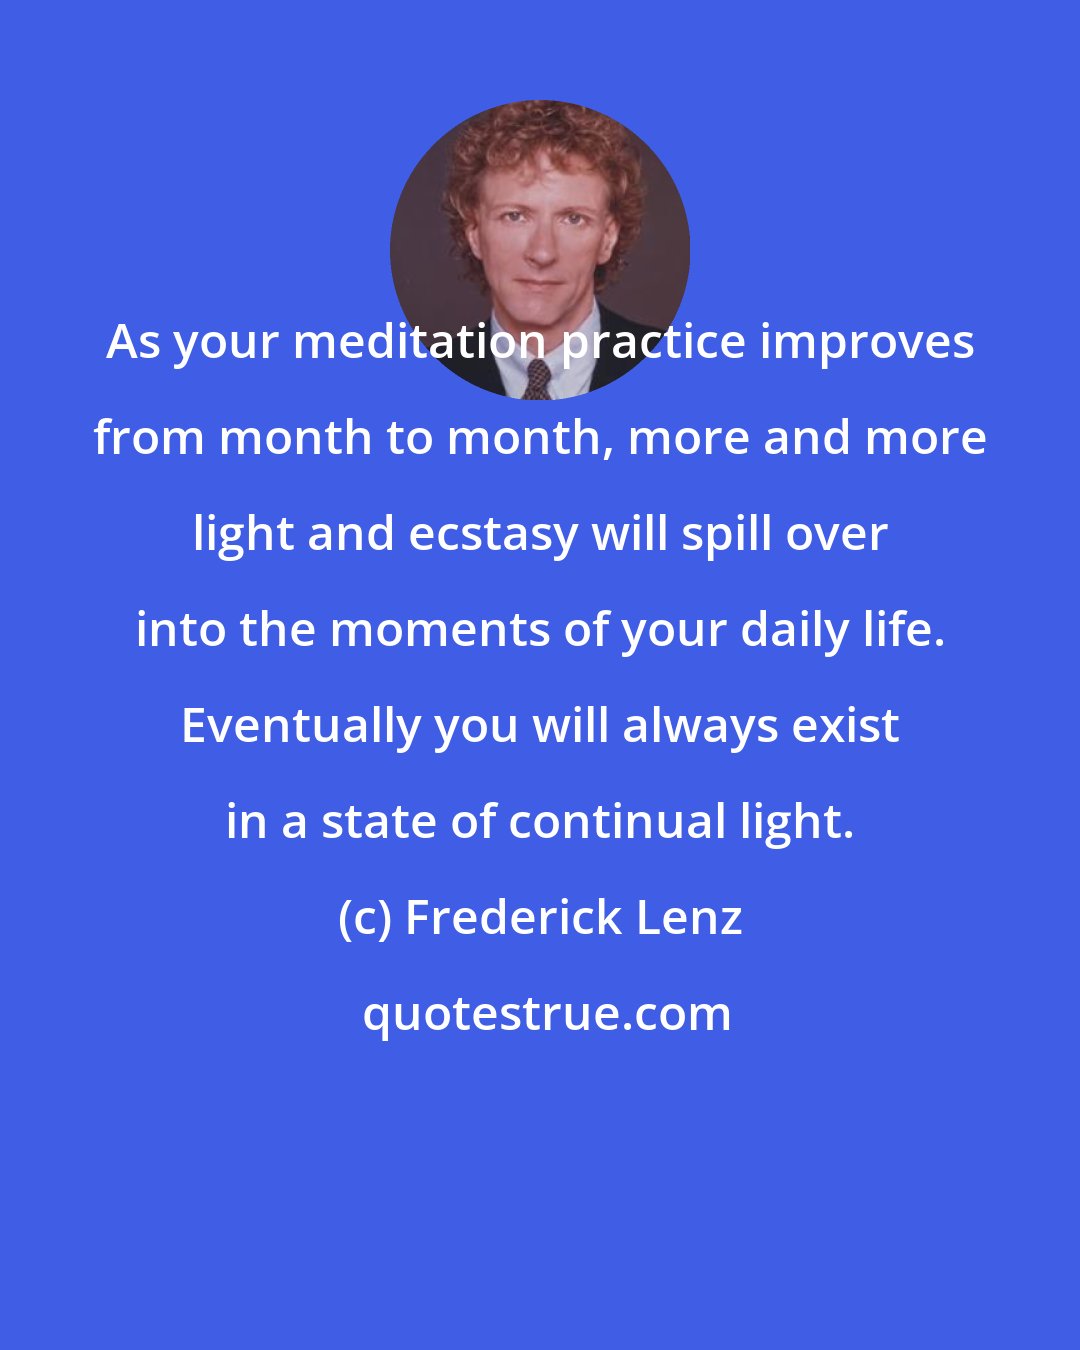 Frederick Lenz: As your meditation practice improves from month to month, more and more light and ecstasy will spill over into the moments of your daily life. Eventually you will always exist in a state of continual light.